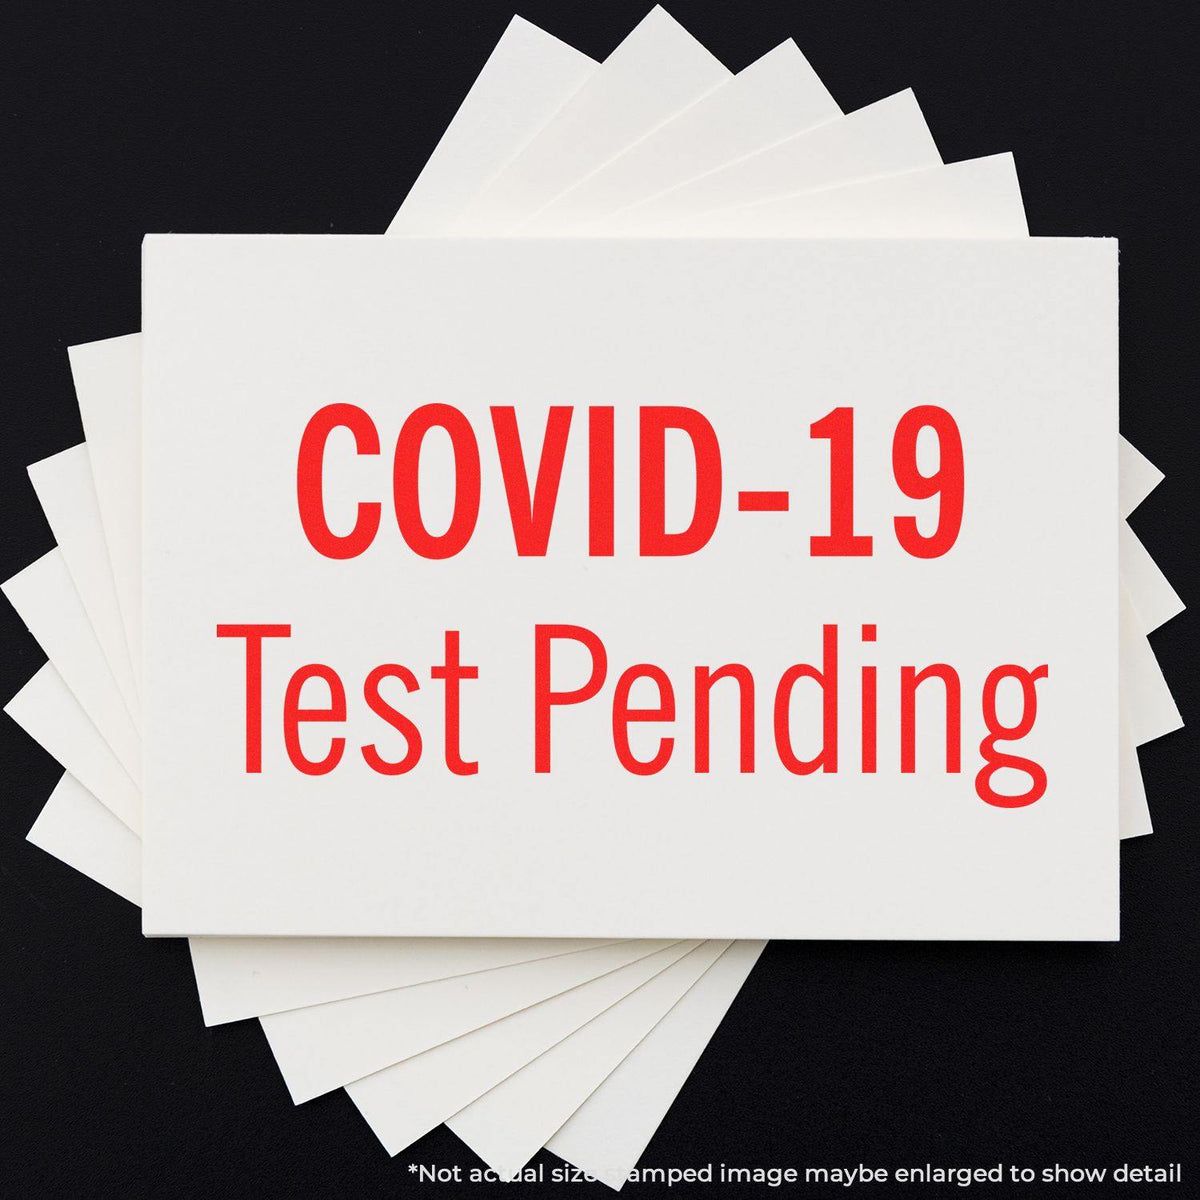 Covid-19 Test Pending Rubber Stamp In Use Photo